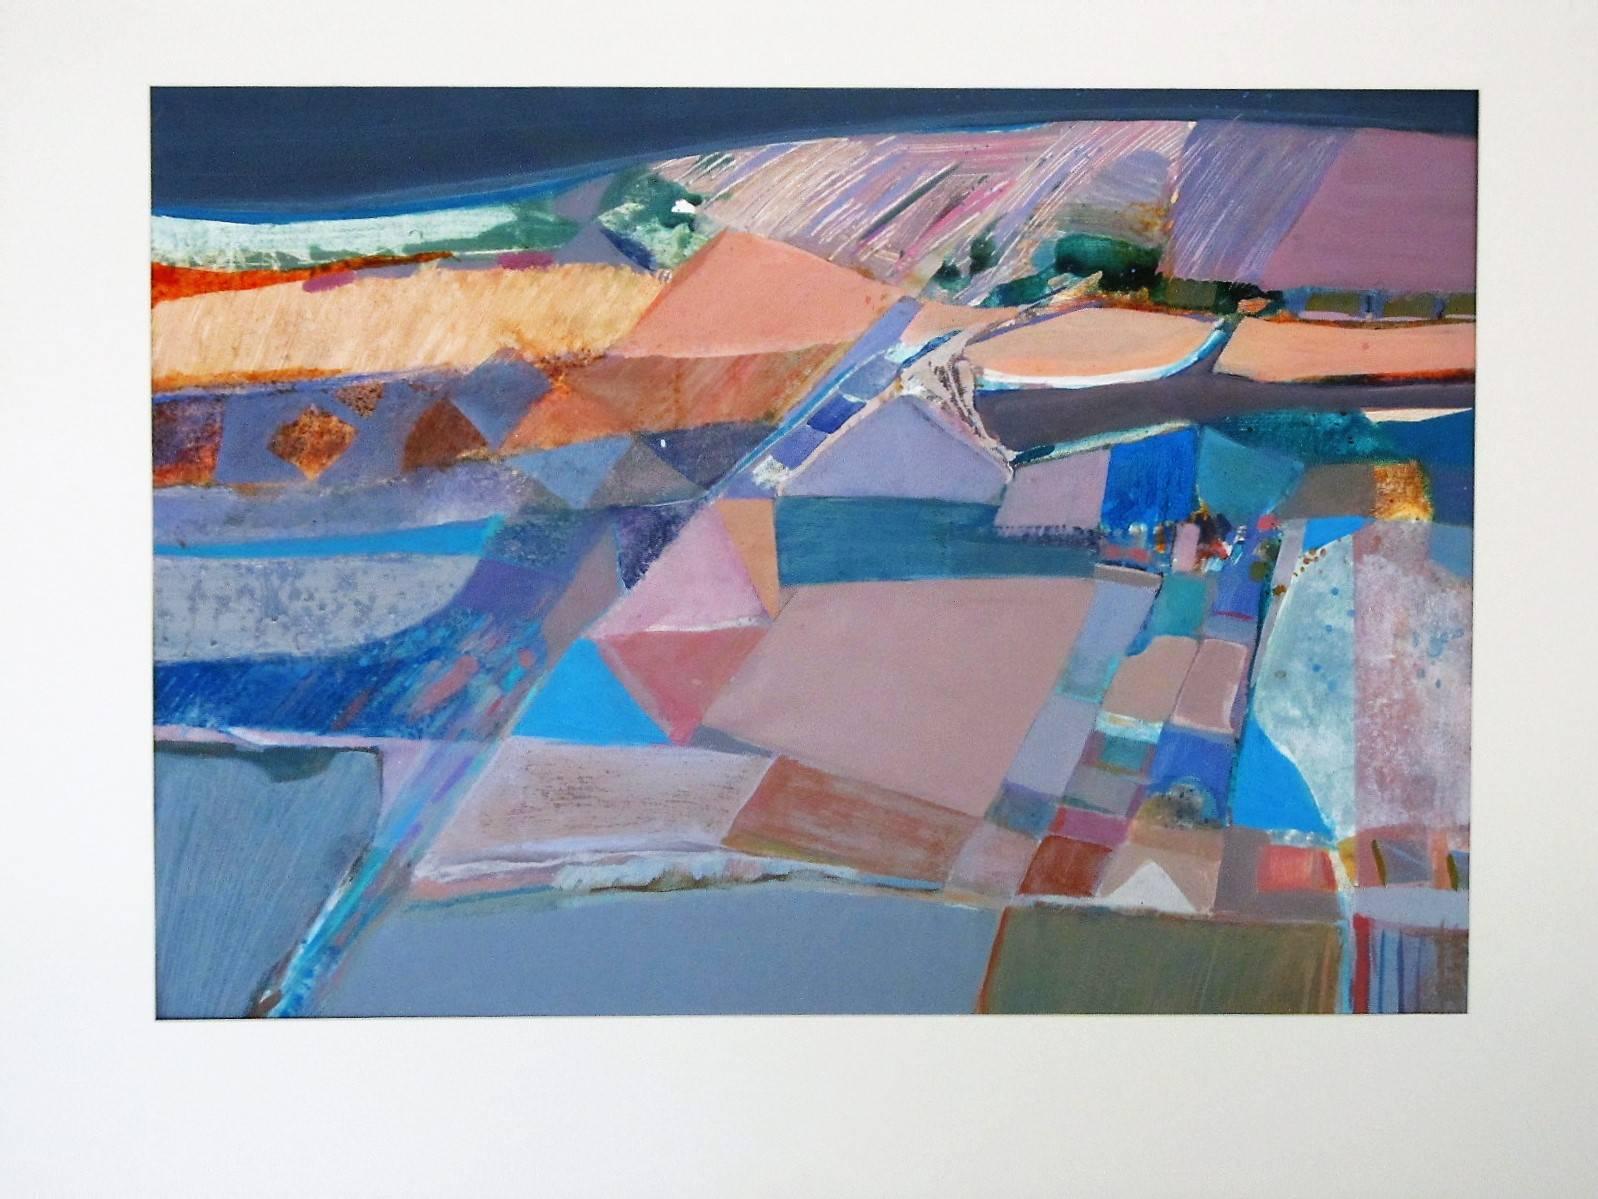 Margaret Smith was a Bay Area modernist painter whose works were frequently abstract interpretations of landscapes or seascapes. In this piece she has broken an aerial landscape into geometric shapes. 